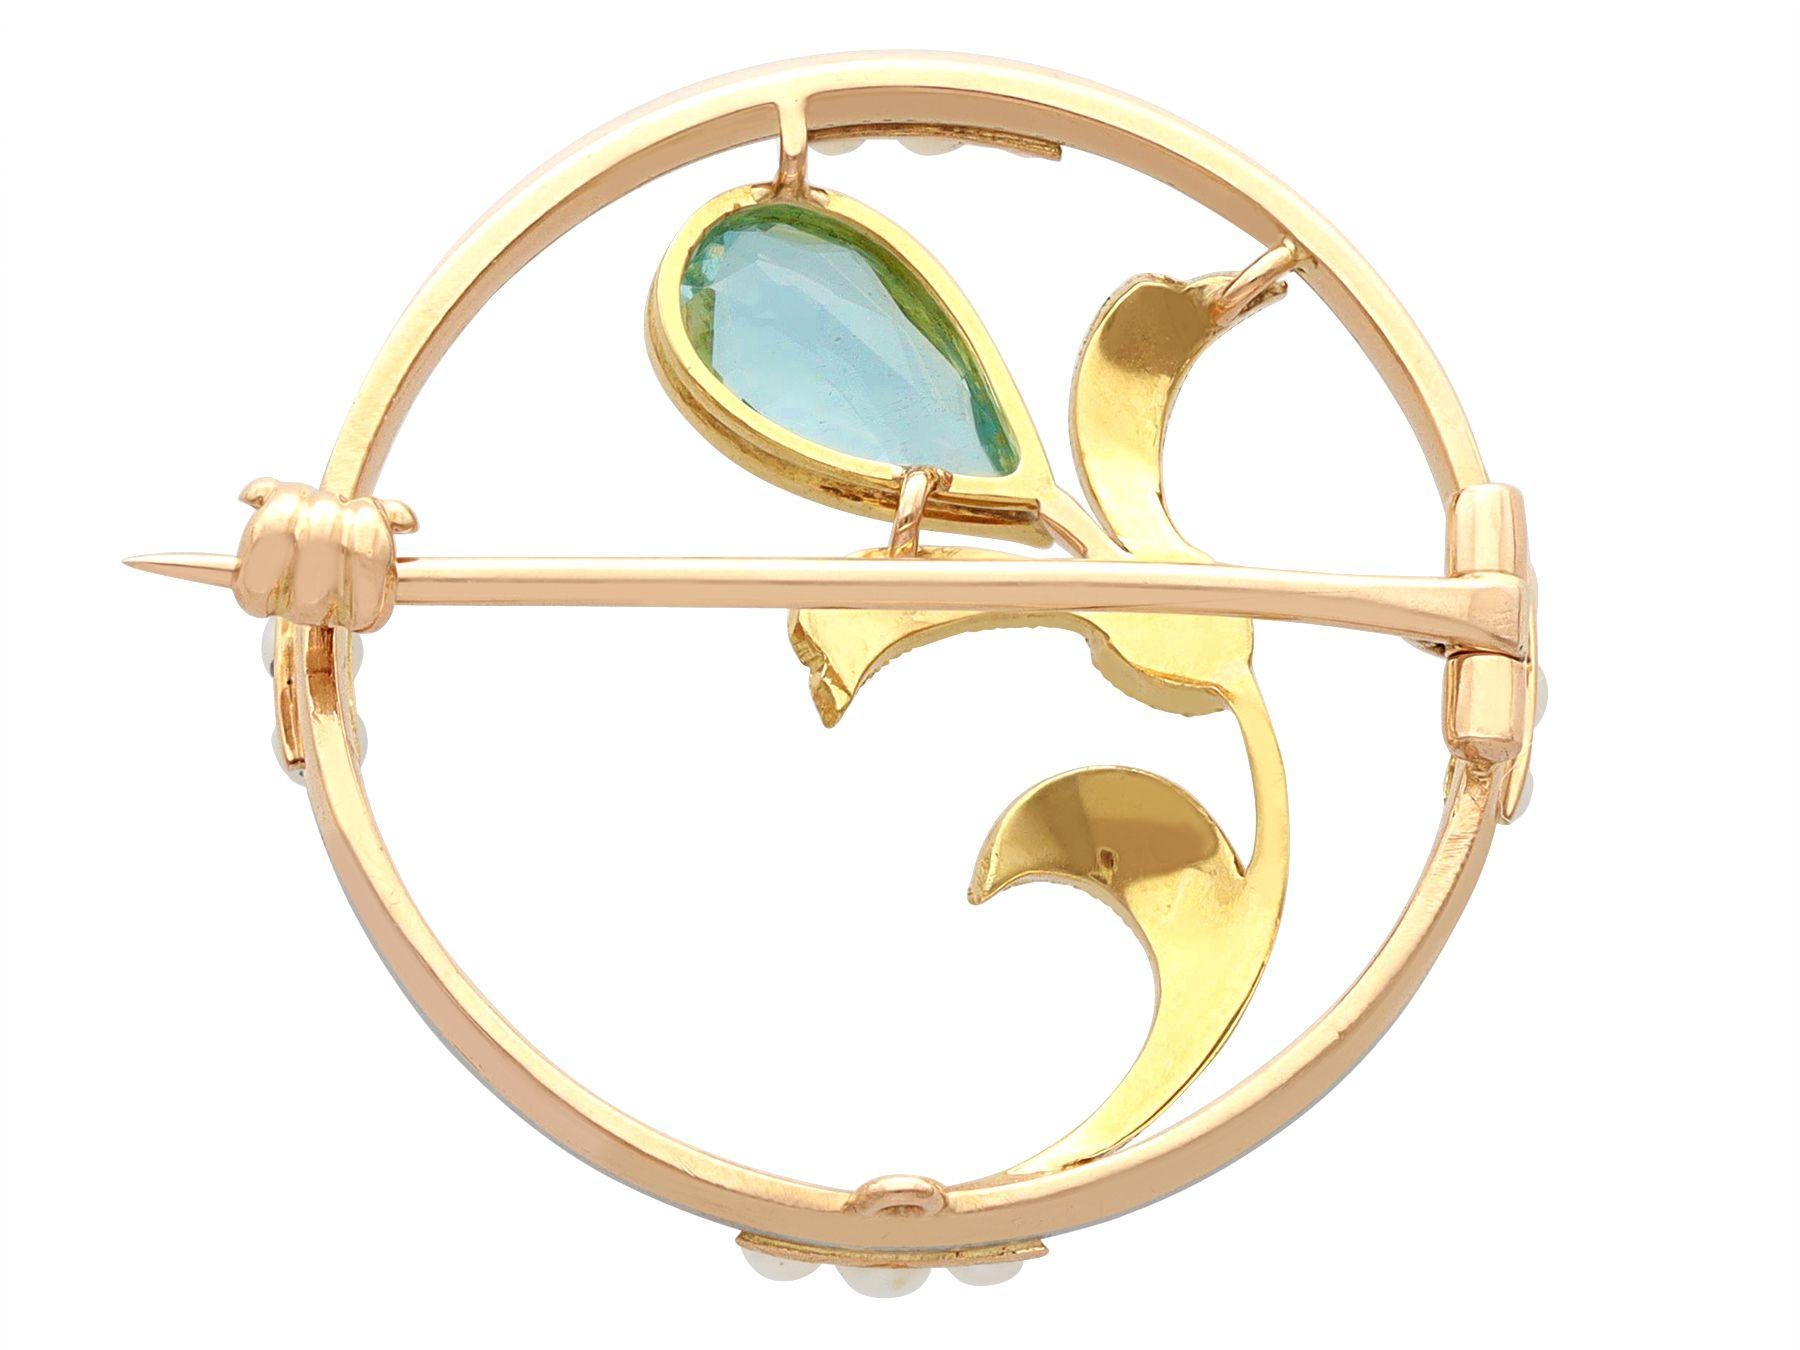 Antique Art Nouveau Aquamarine and Pearl Yellow Gold Brooch In Excellent Condition For Sale In Jesmond, Newcastle Upon Tyne